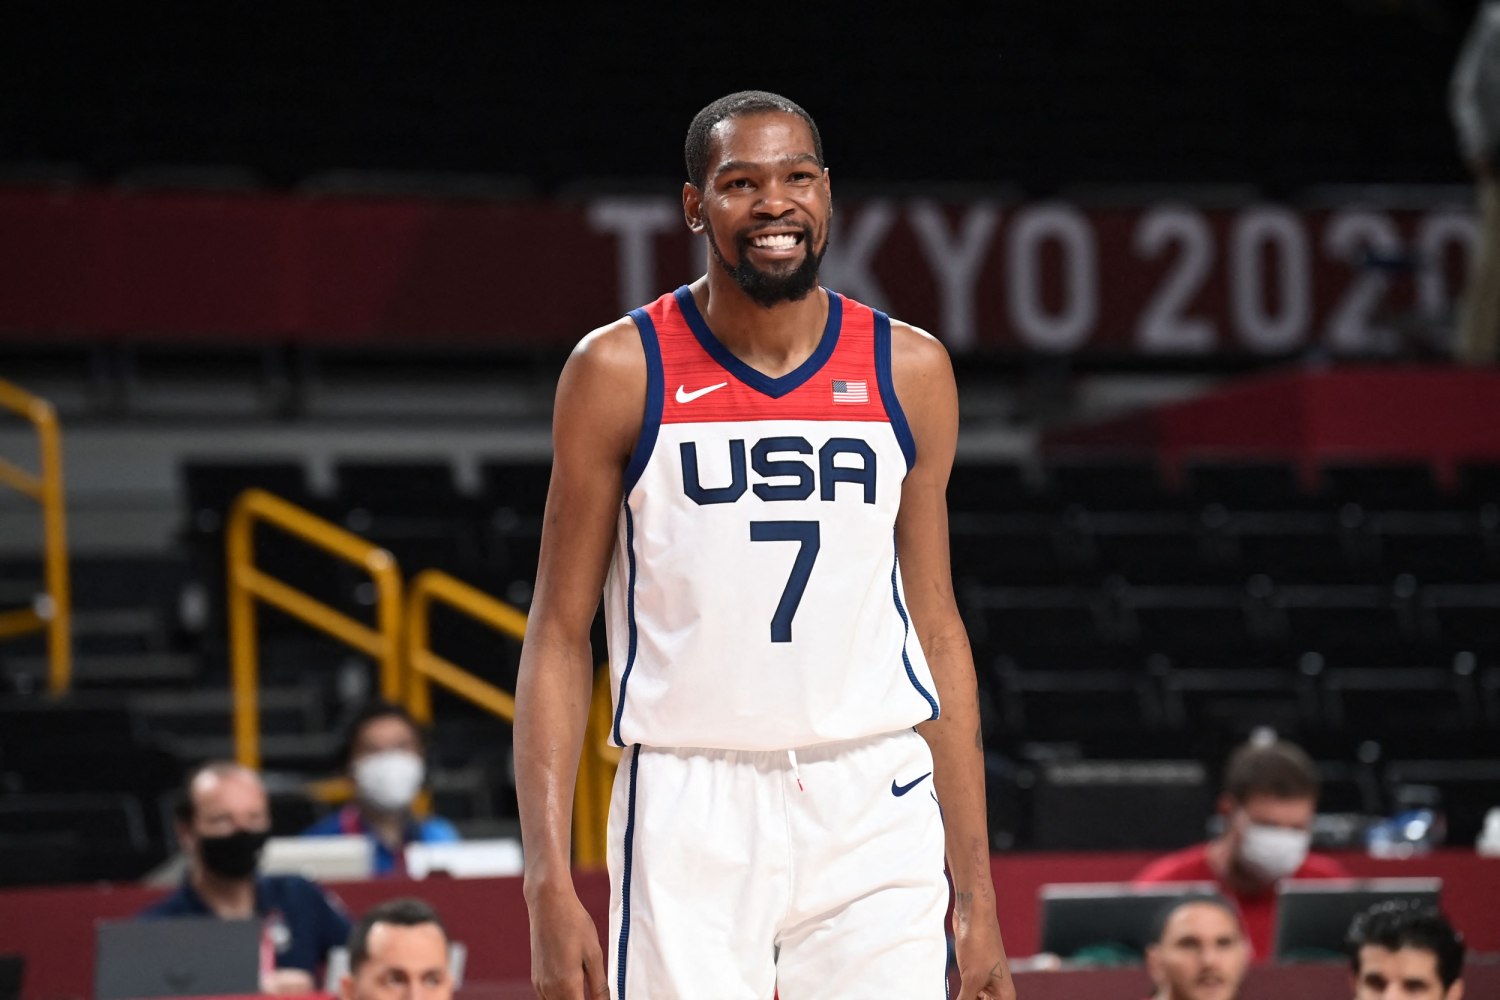 Kevin Durant scores 10, fouls out as U.S. suffers first Olympic